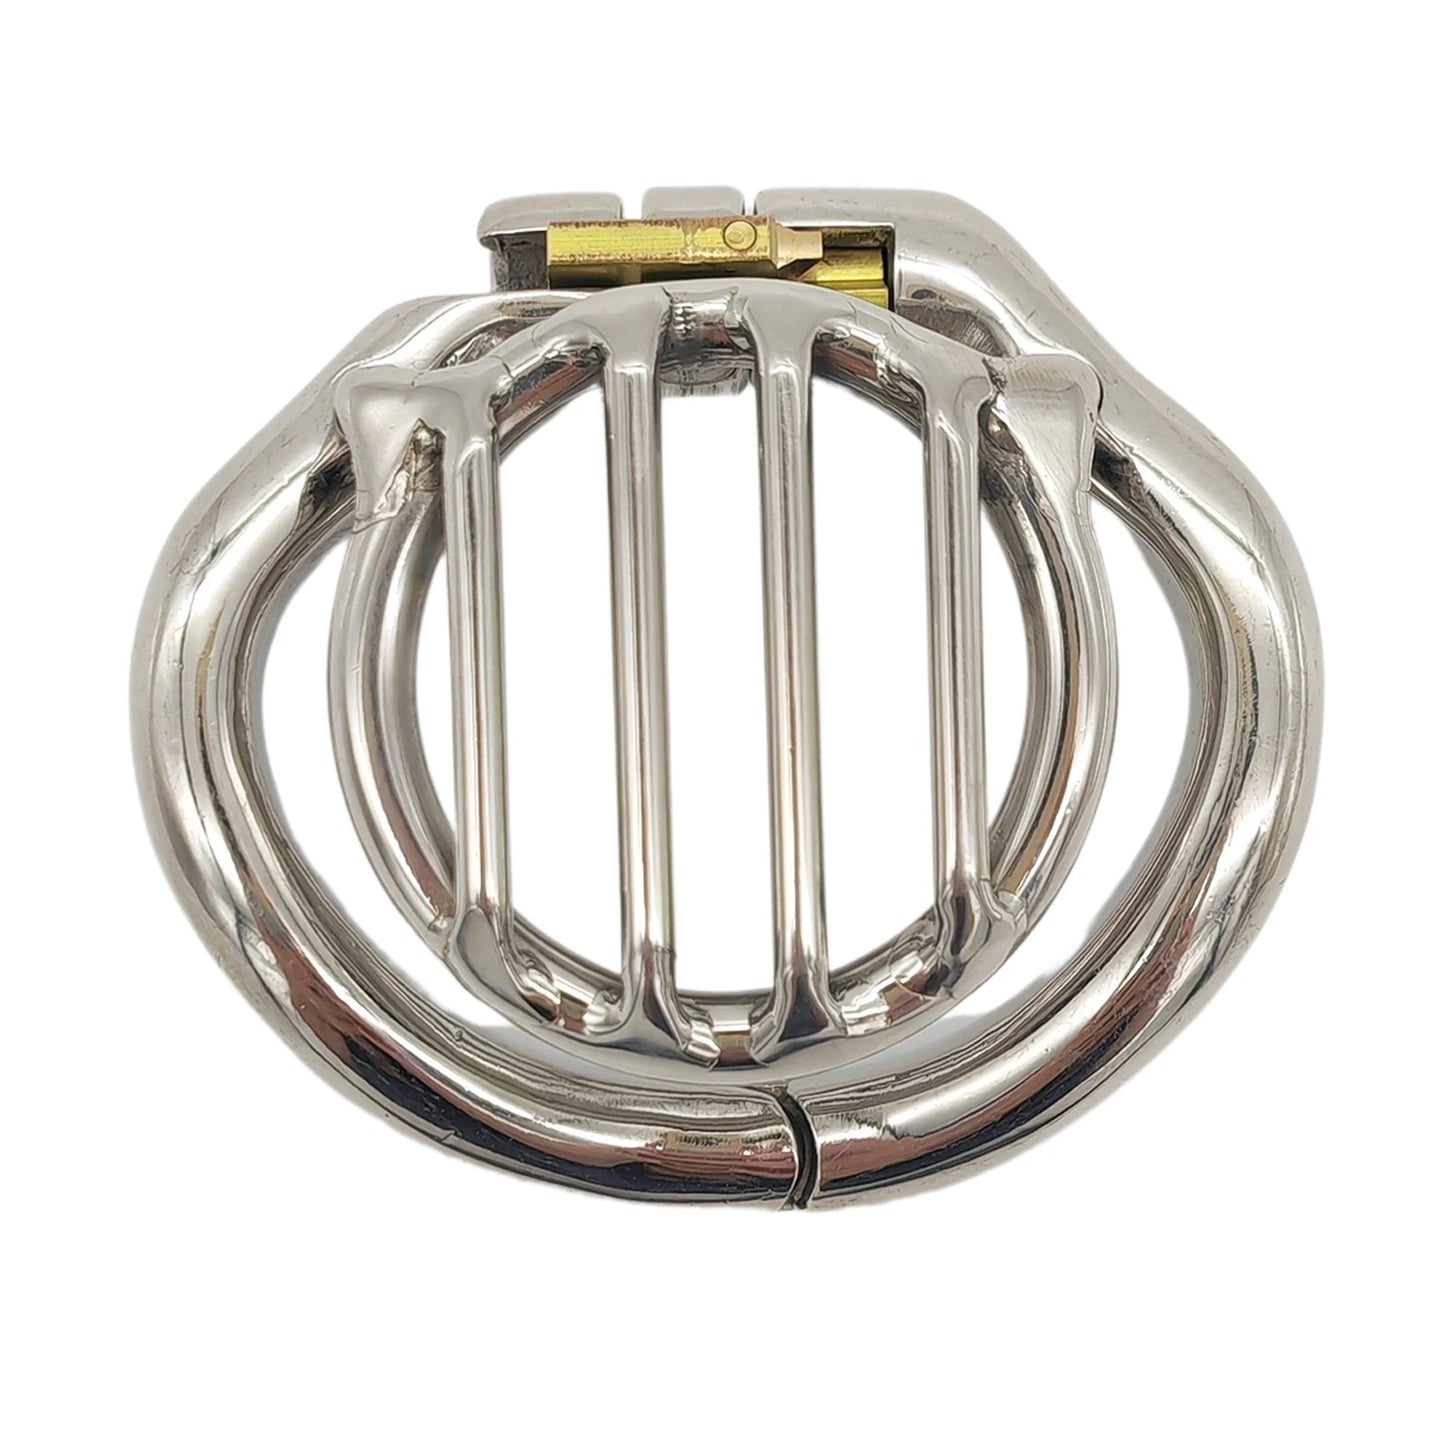 Newest Flat Cage Stainless Steel Male Chastity Device